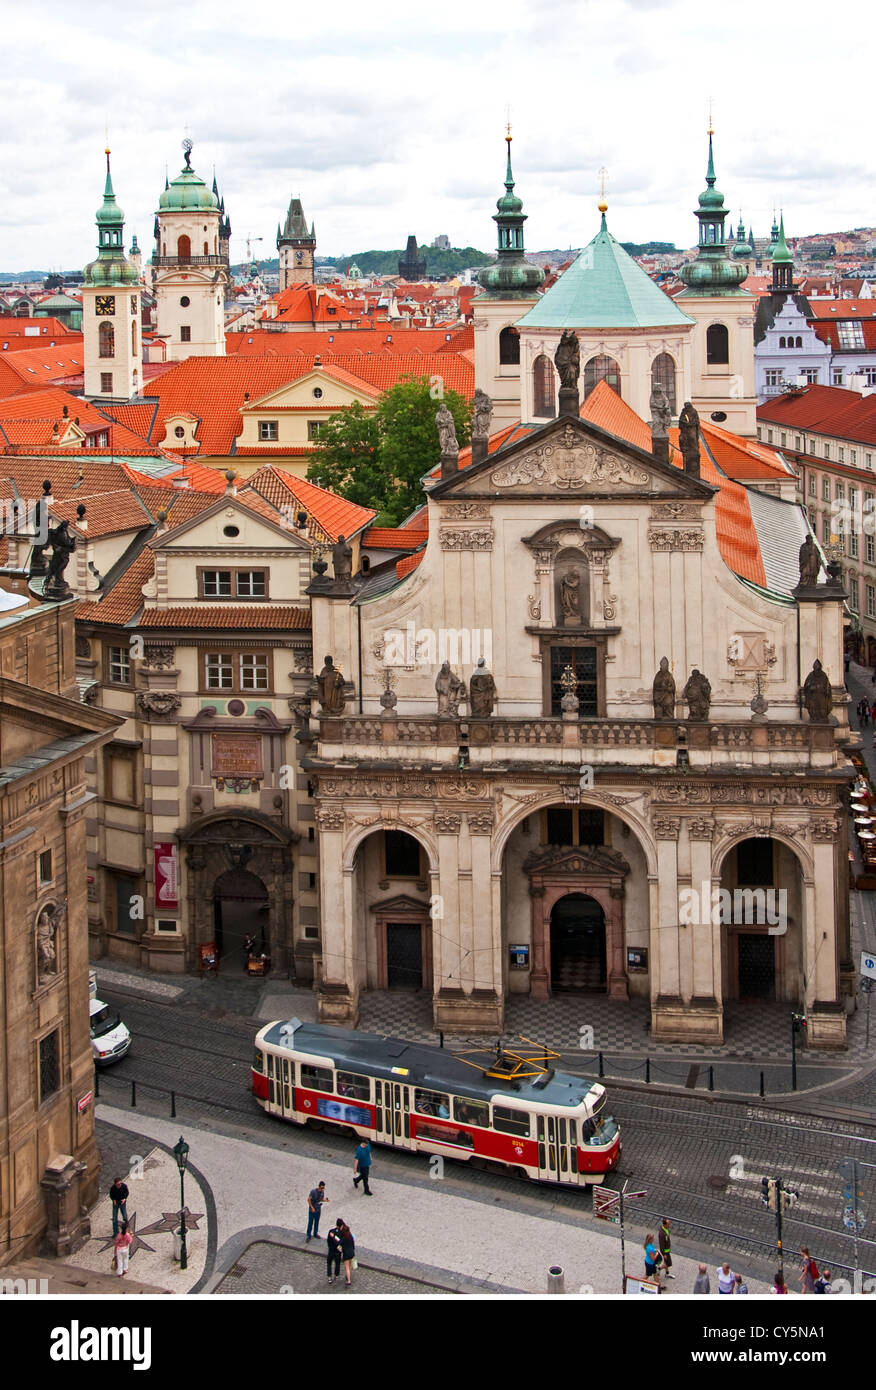 Tram 17 in Krizovnicke (Knights of the Cross) Square with St. Salvator Church in Prague Stock Photo